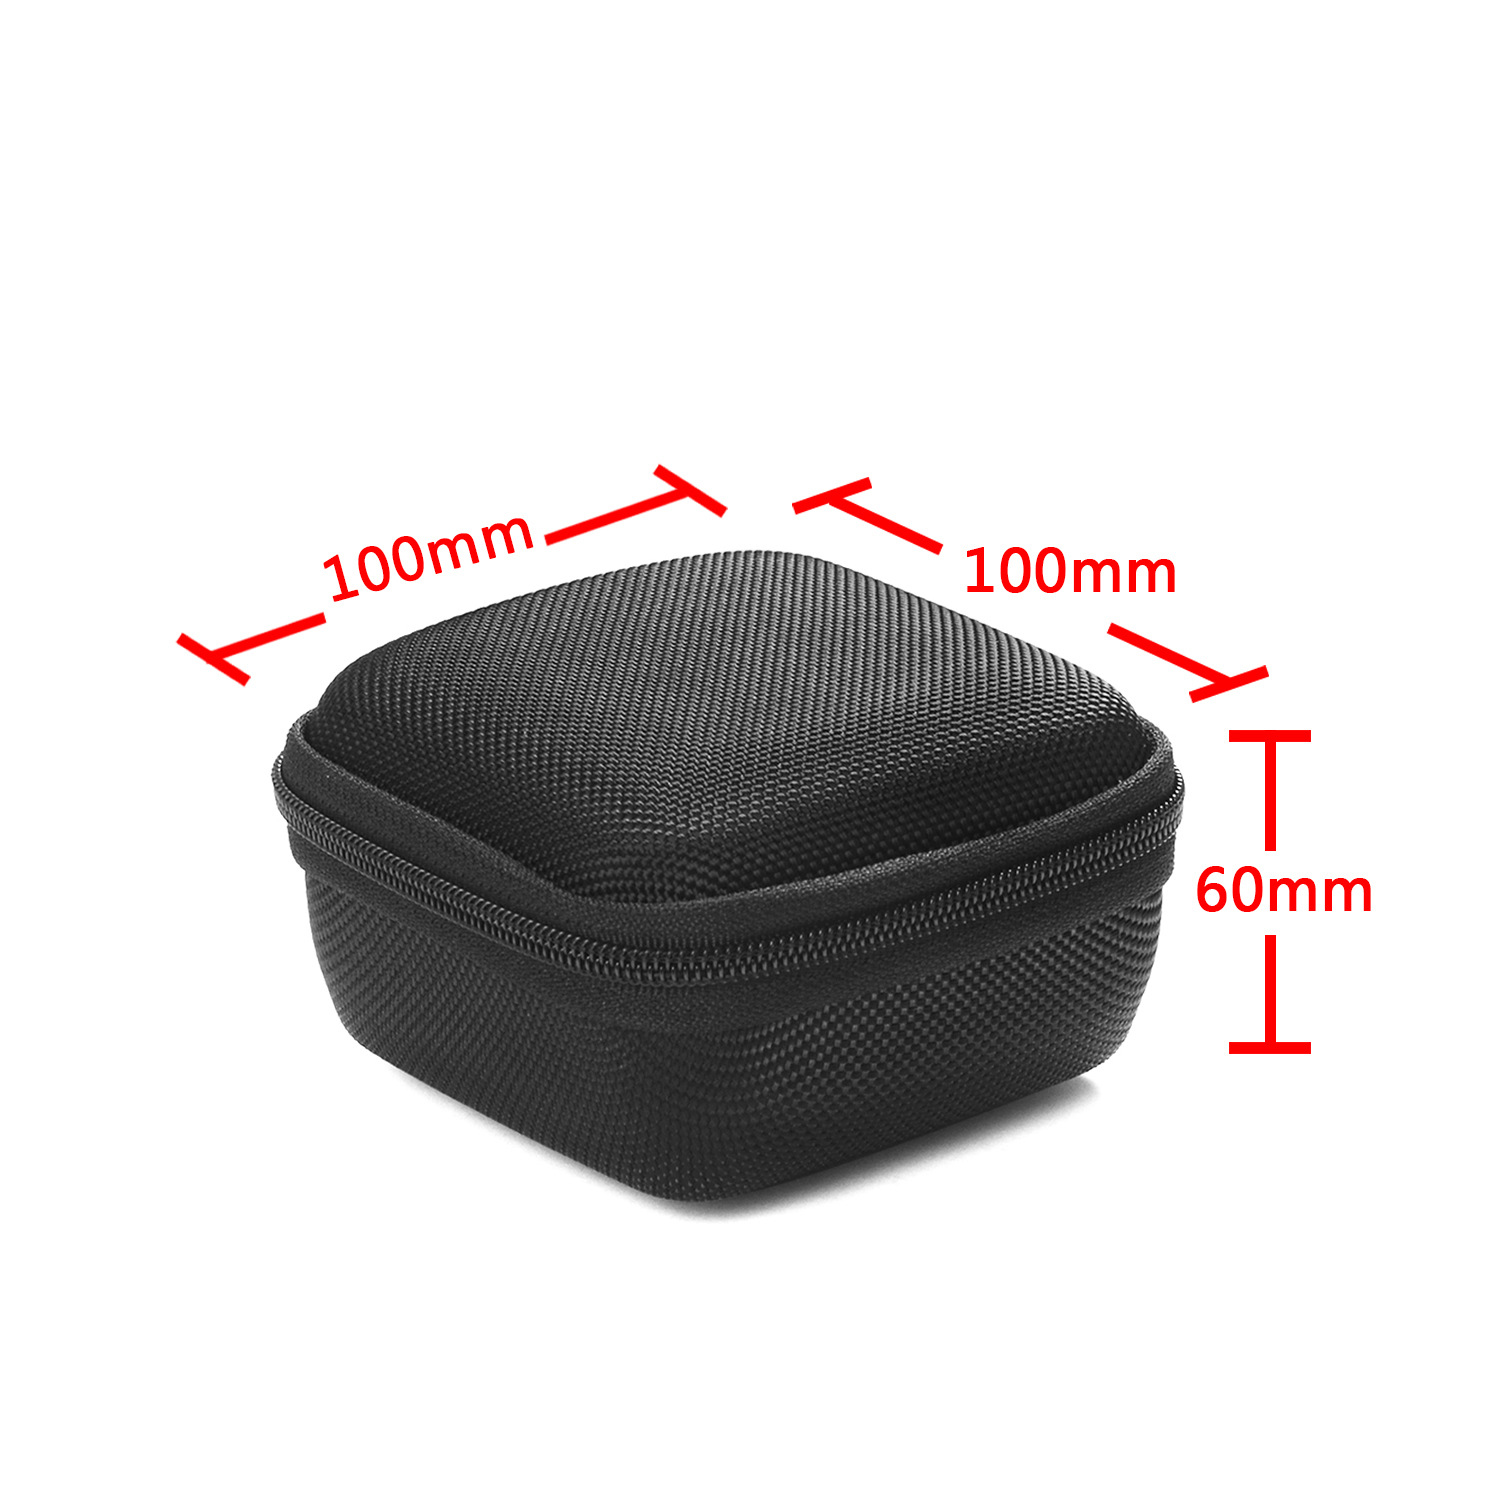 Earphone-Protection-Case-Multifunction-Storage-Bag-Portable-Travel-Waterproof-Data-Cable-Charger-Hol-1537496-2